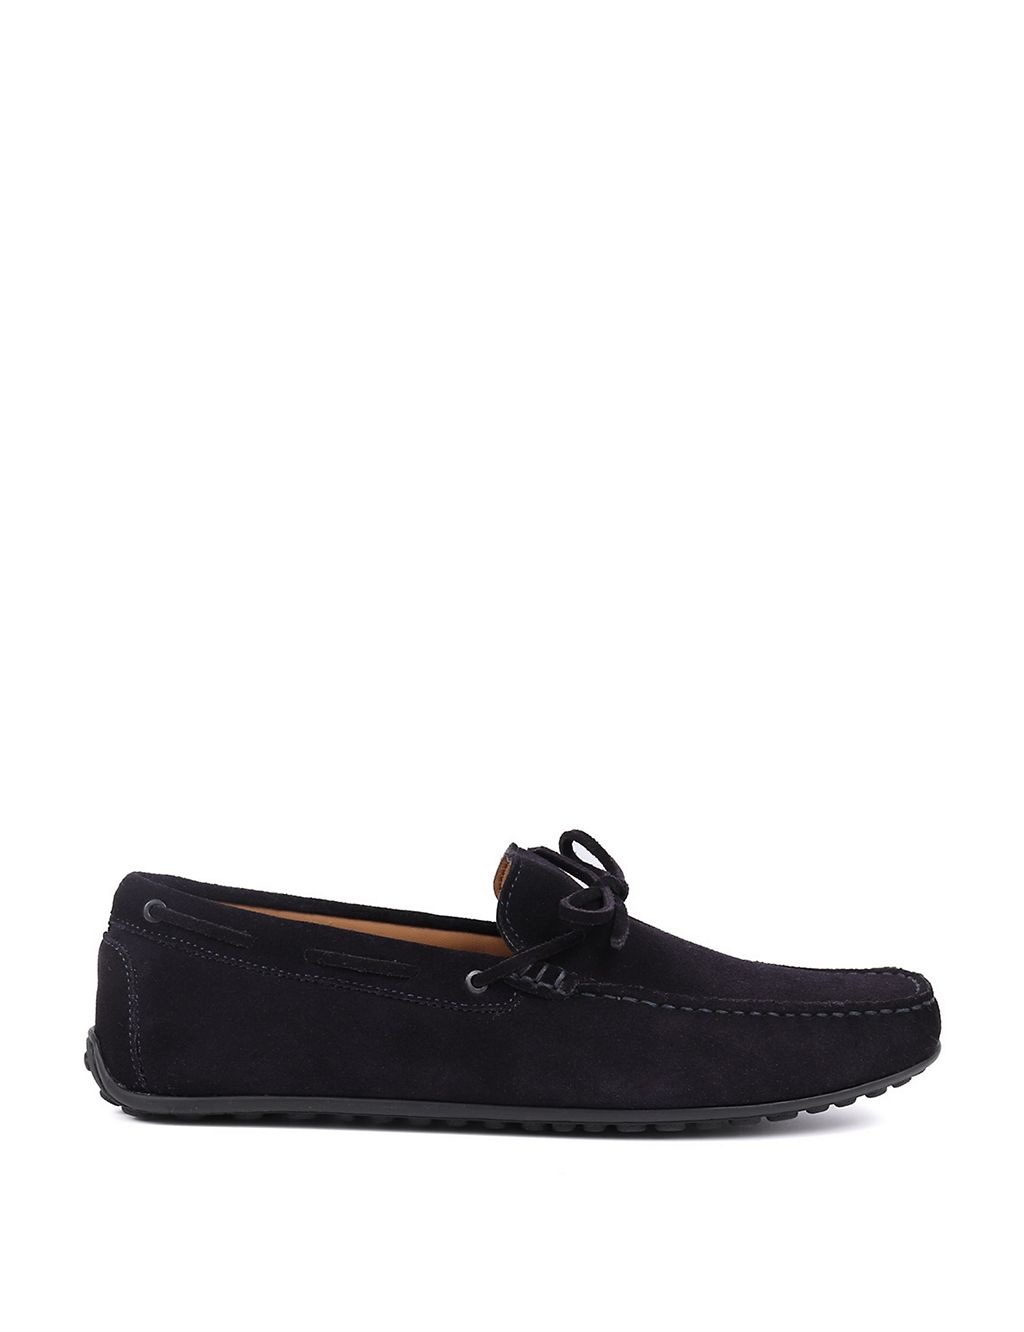 Suede Slip-On Loafers 1 of 7